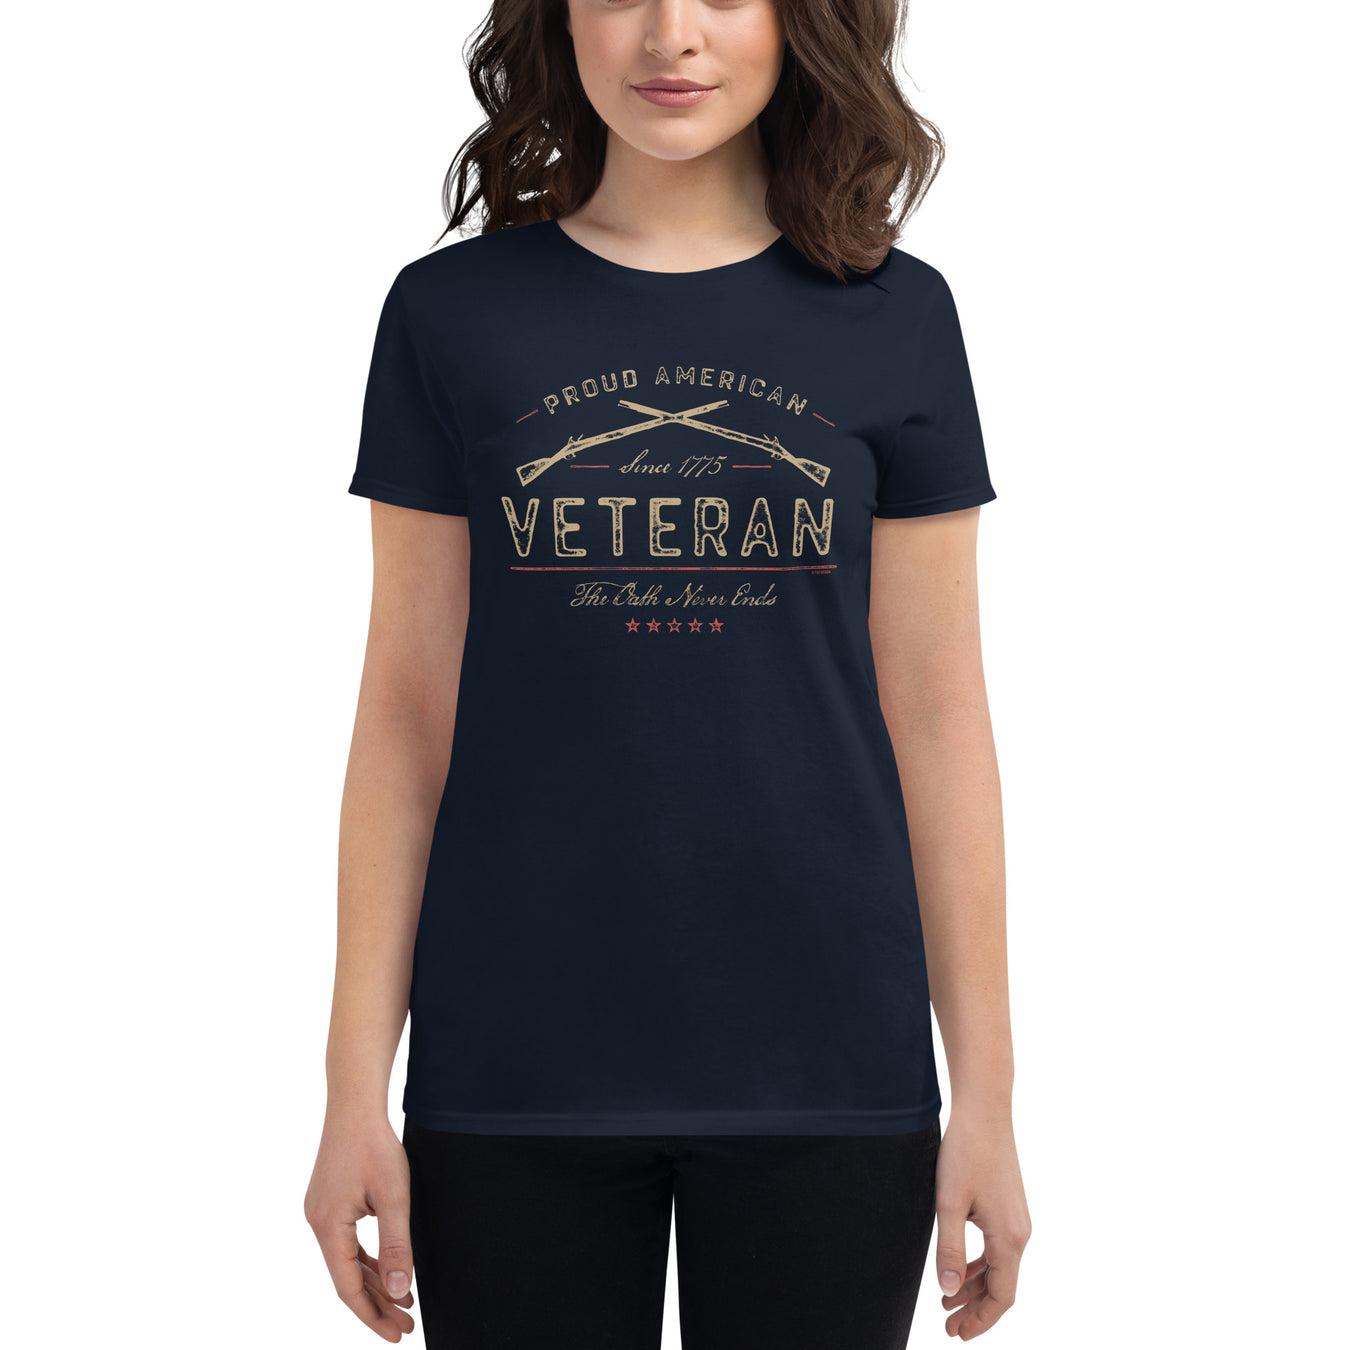 All Veterans Products